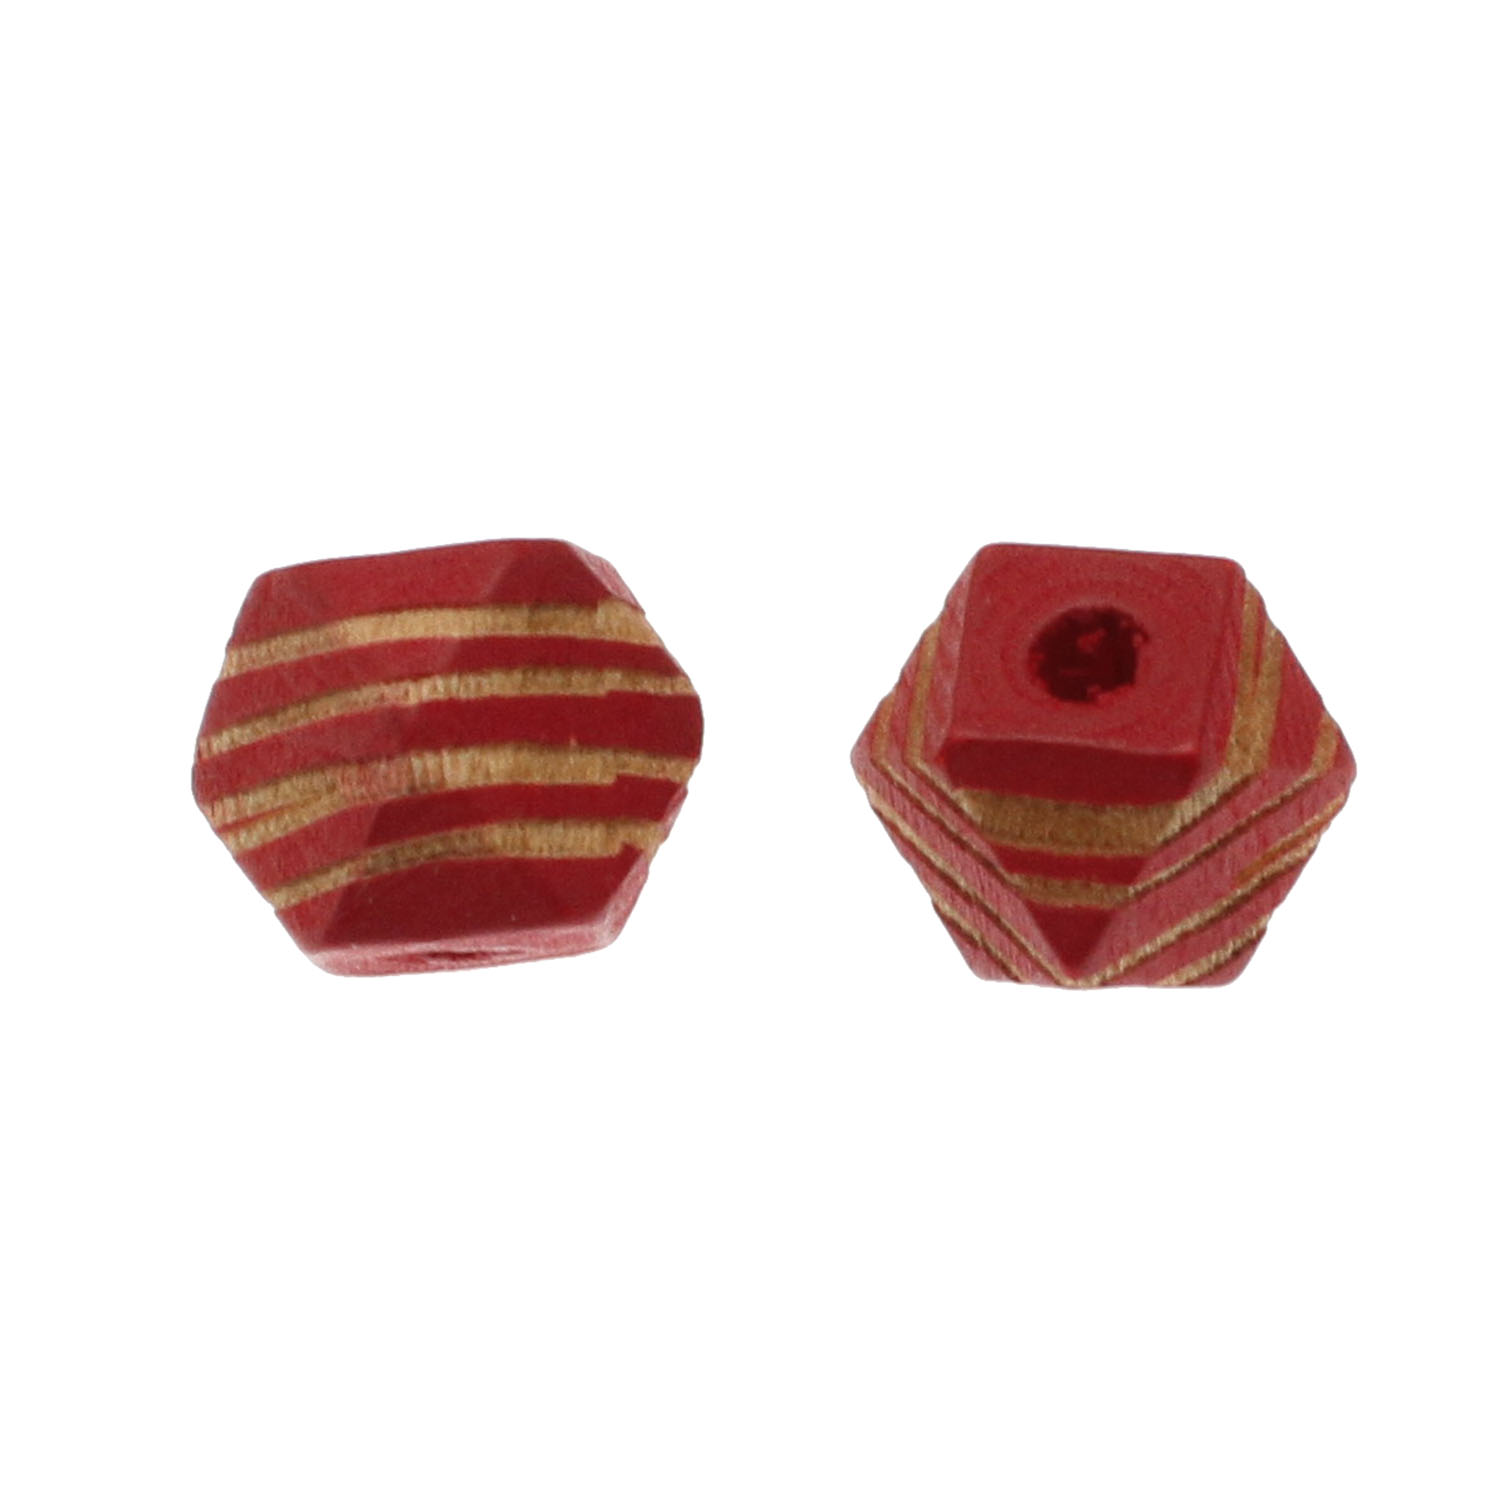 deep red, 12x12mm, Hole: 3mm